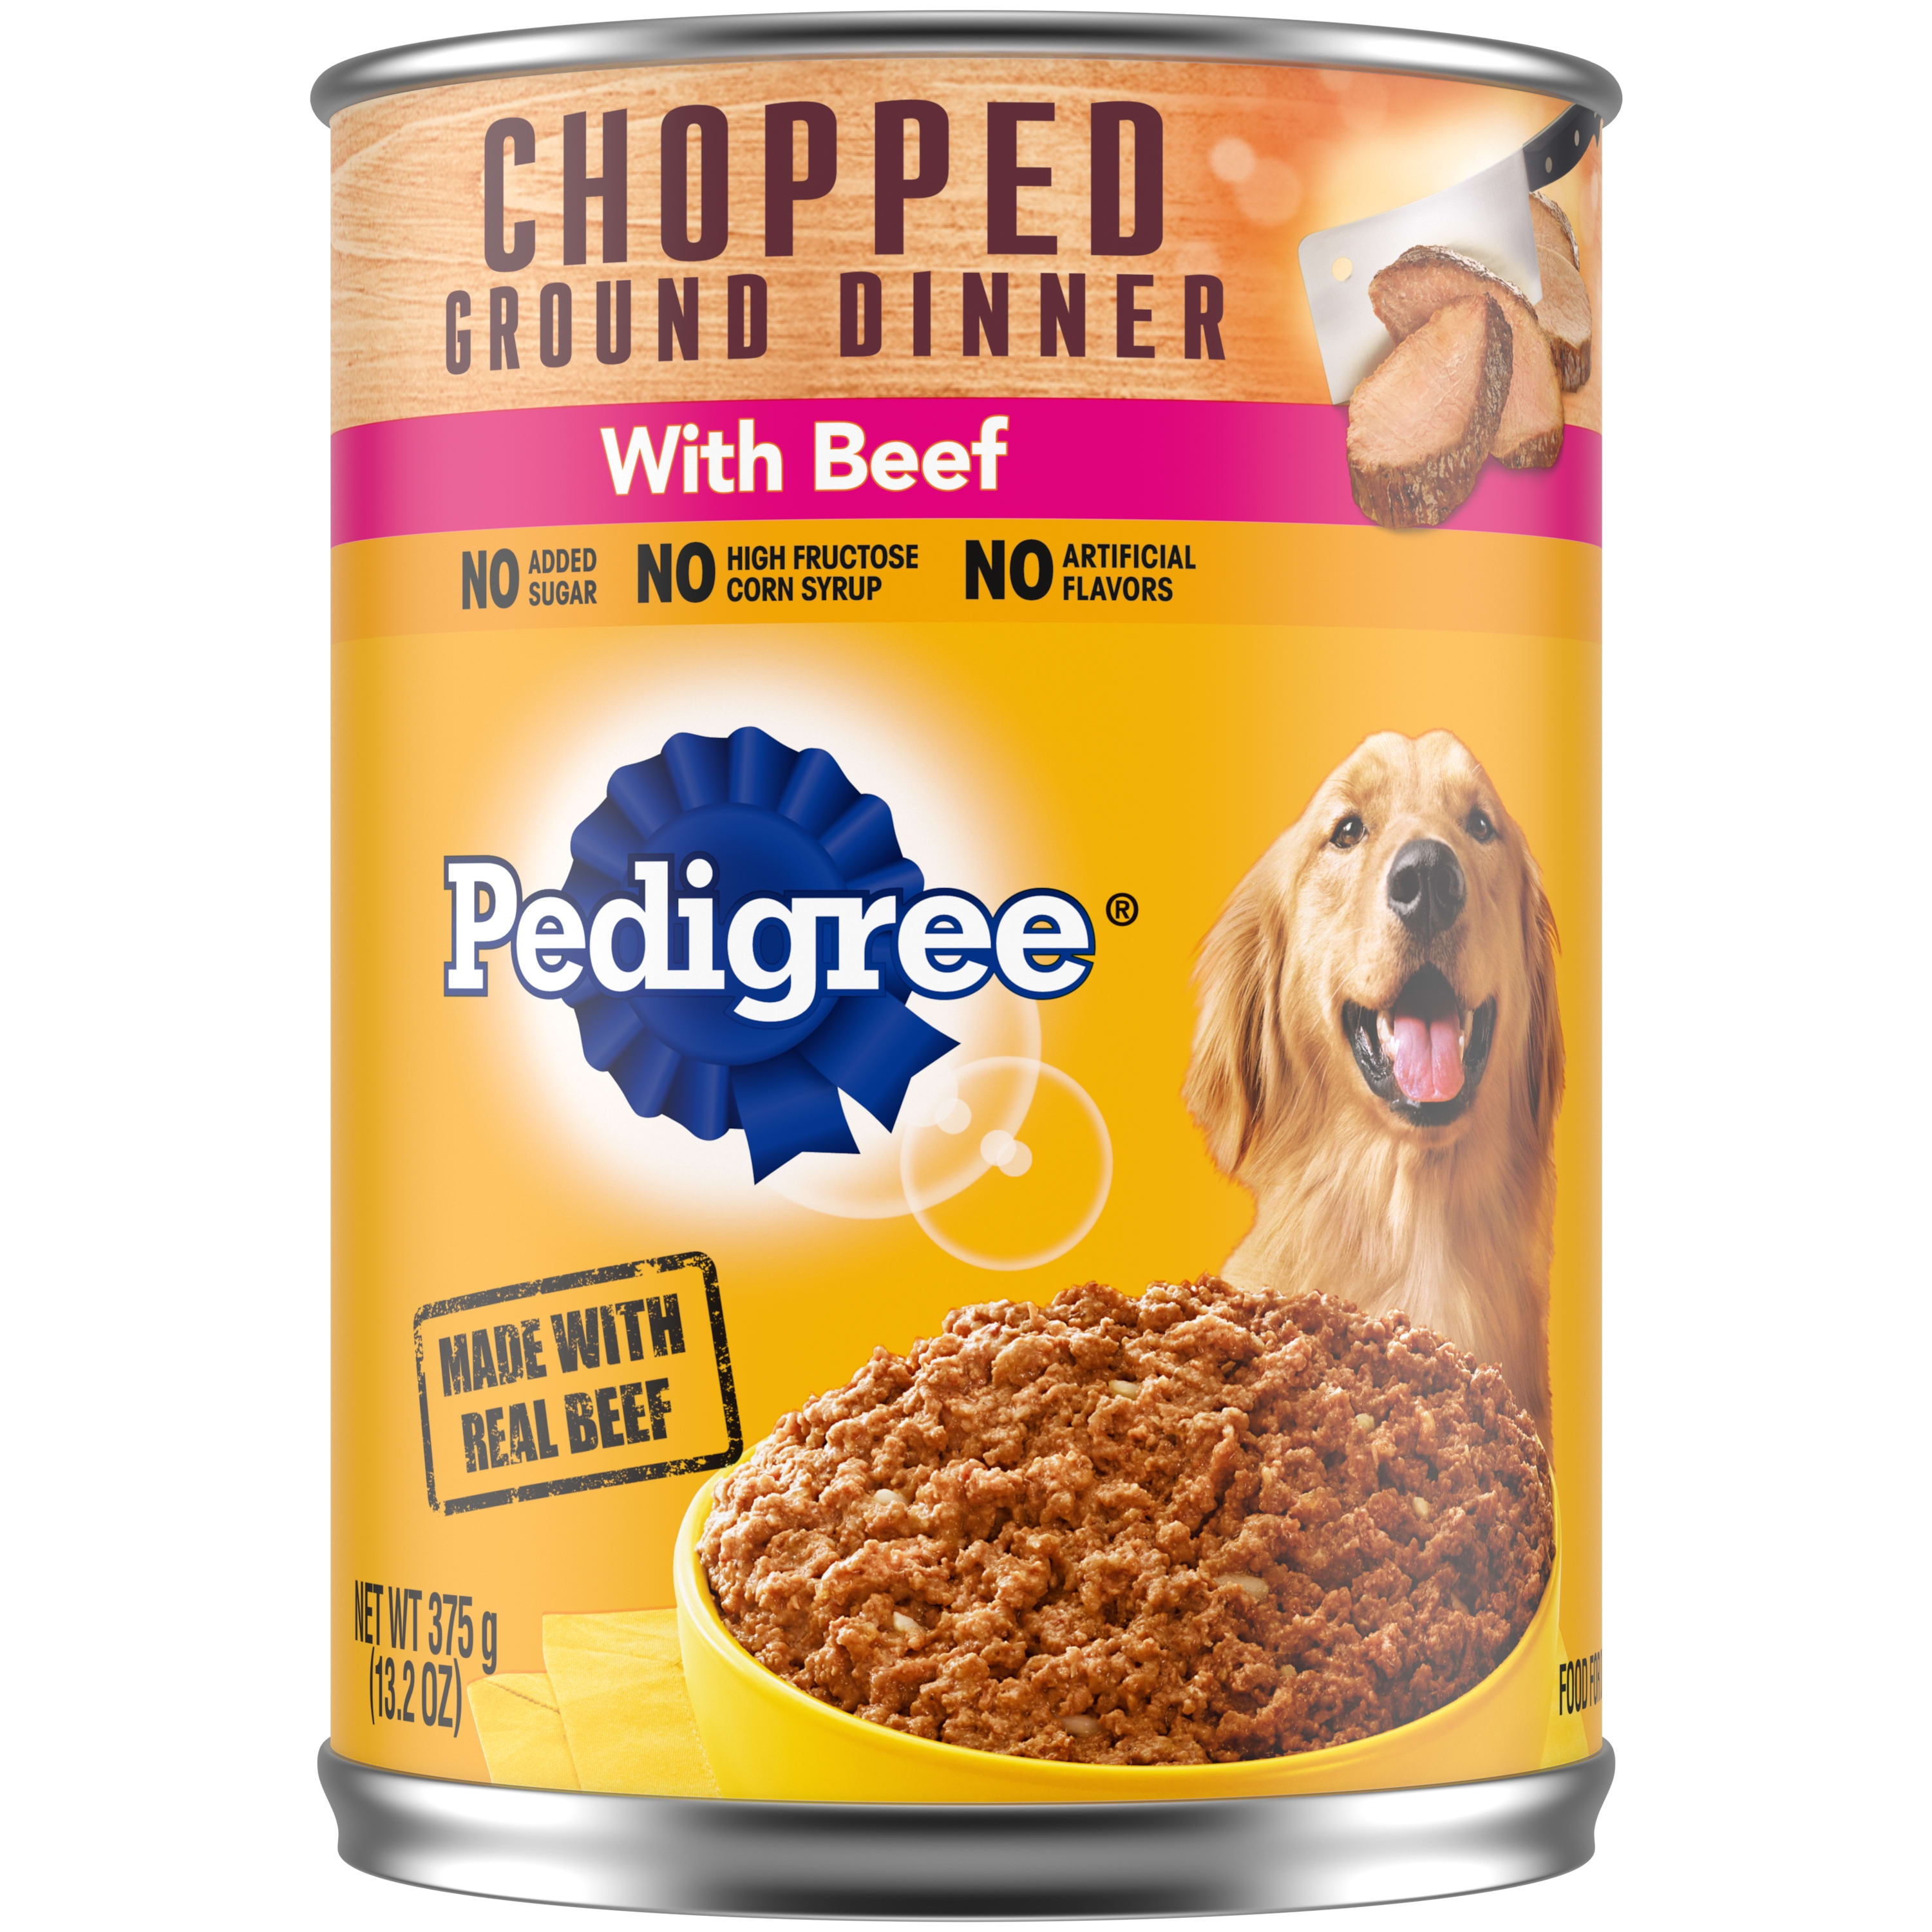 Pedigree Chopped Ground Dinner Adult Canned Soft Wet Dog Food with Beef, 13.2 oz. Can